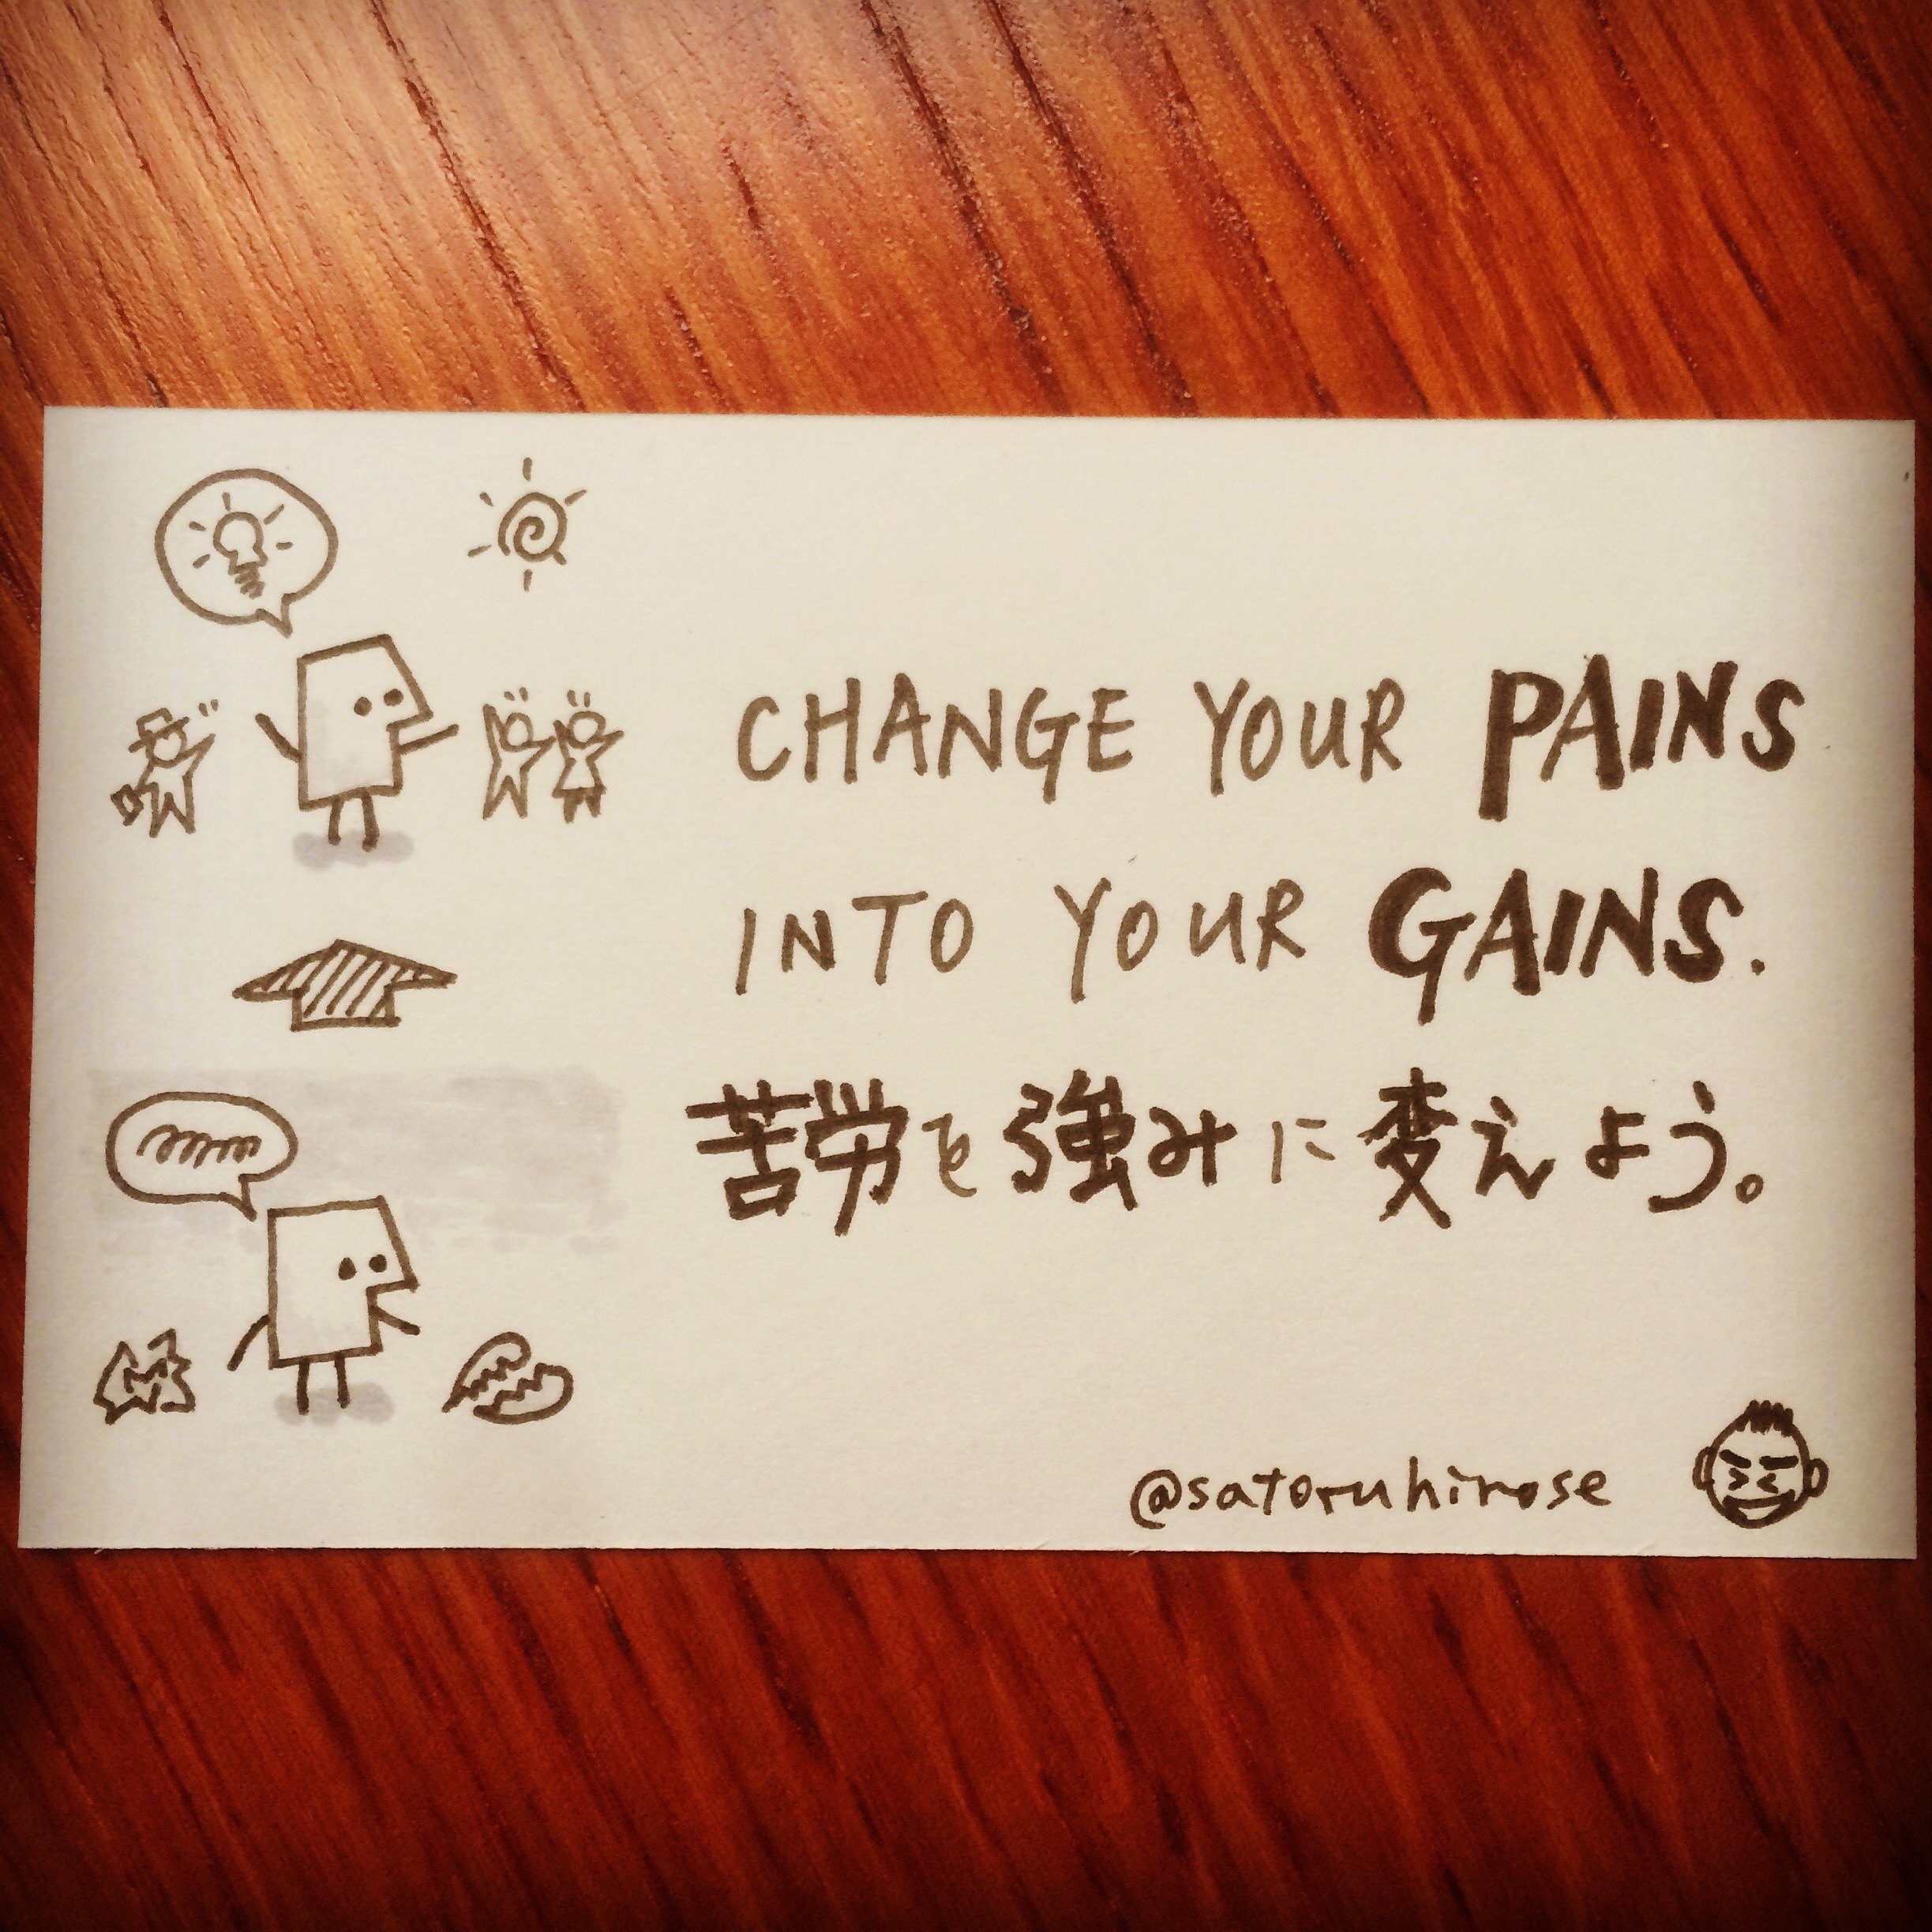 Change your pains into your gains.